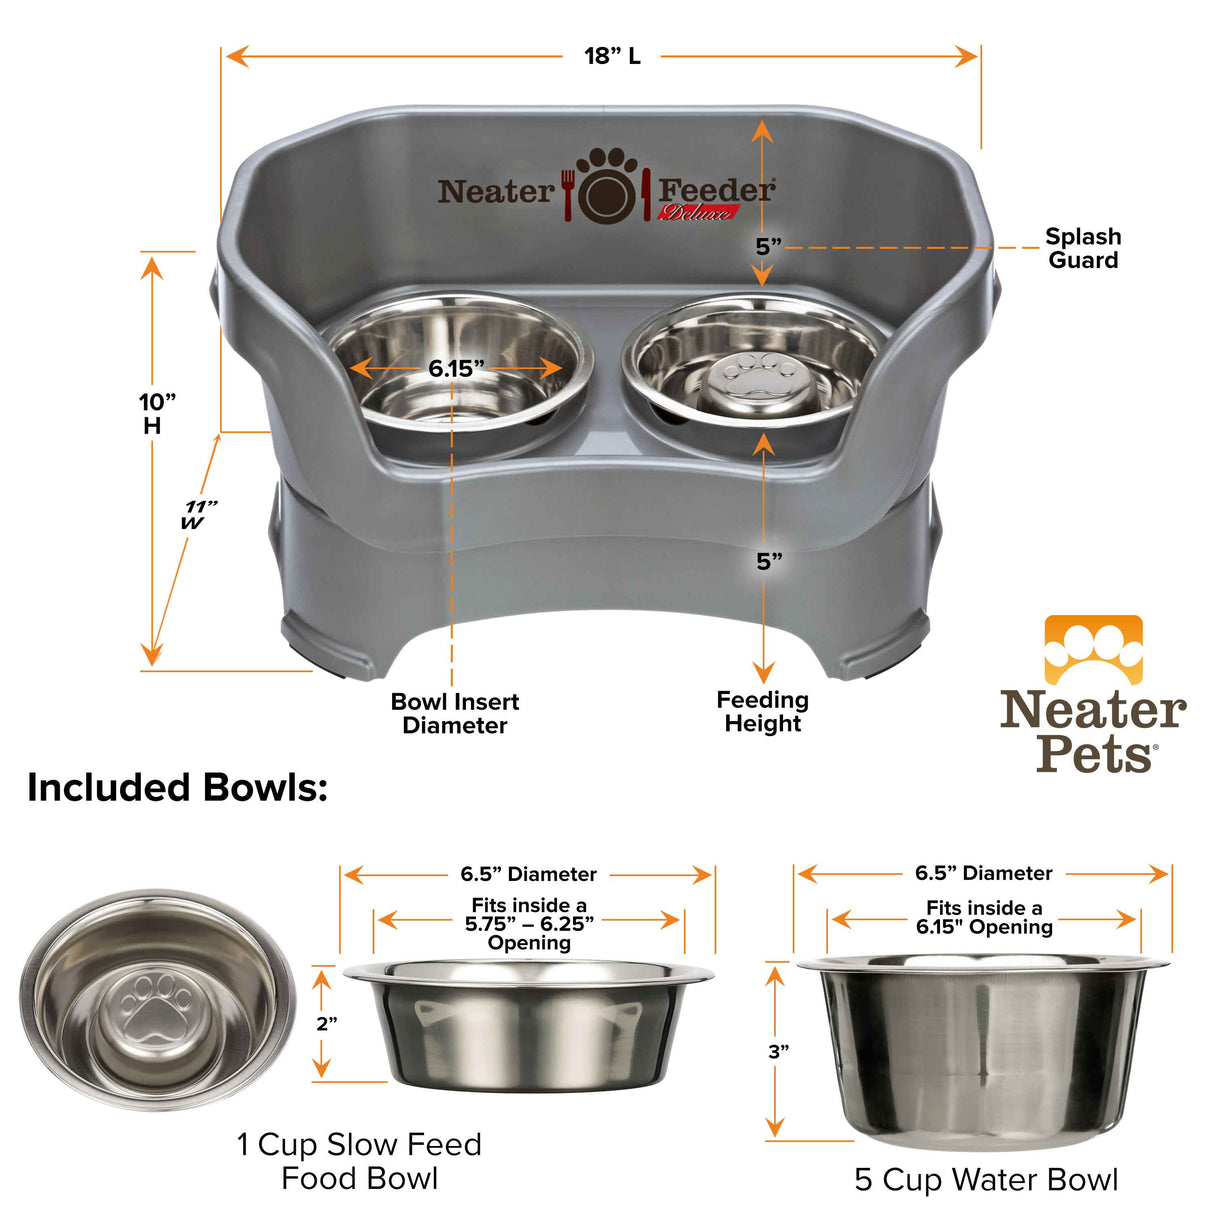 gunmetal gray medium DELUXE Neater Feeder with Stainless Steel Slow Feed Bowl dimensions